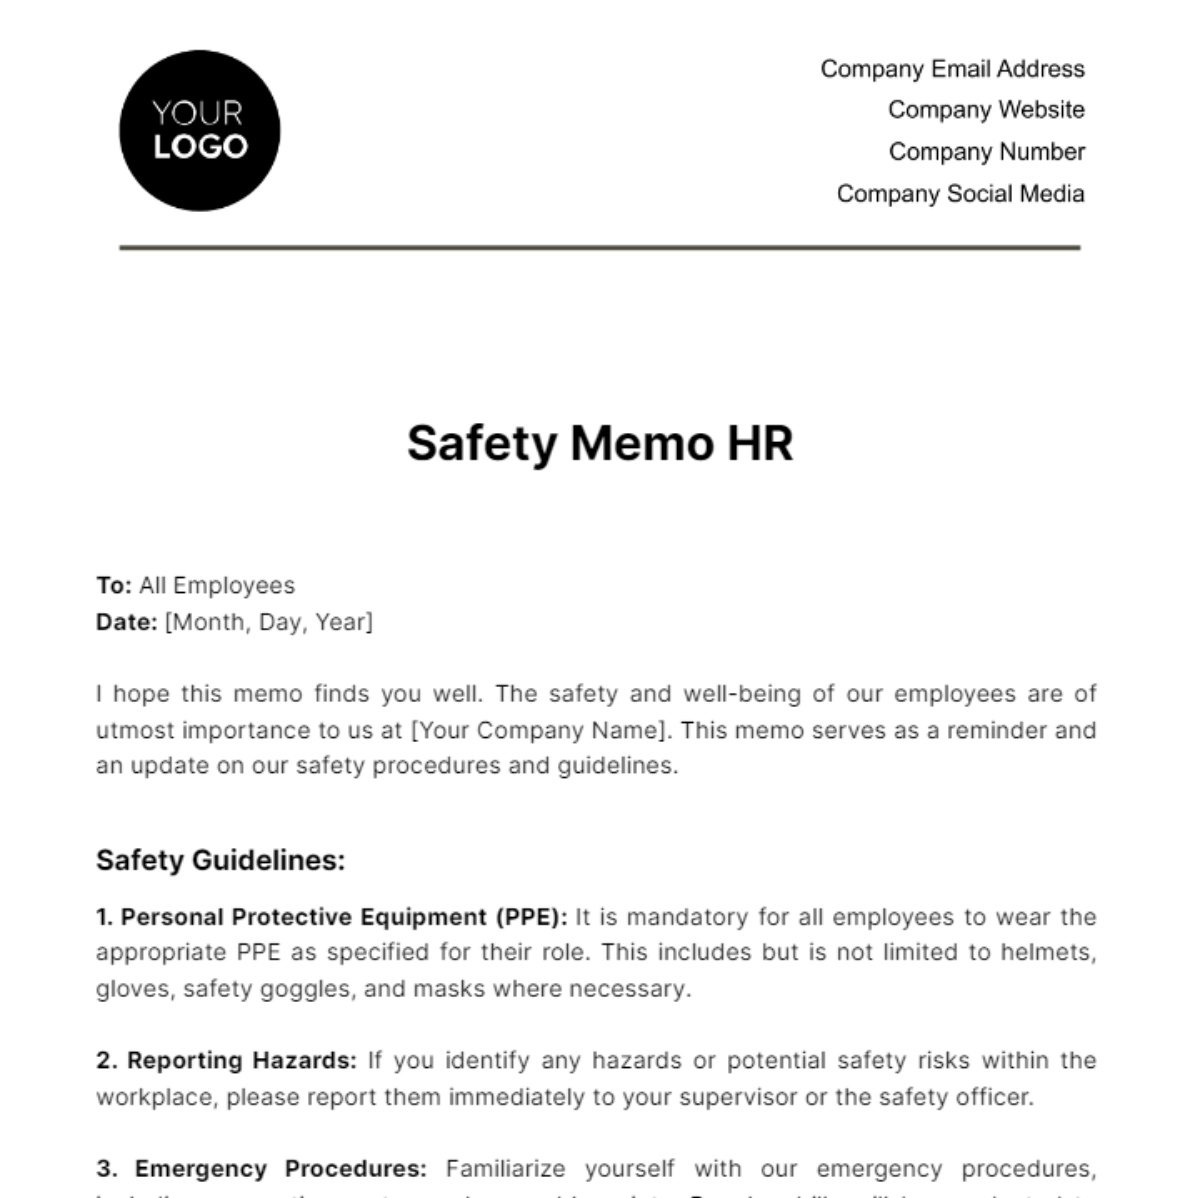 Free Safety Memo HR Template